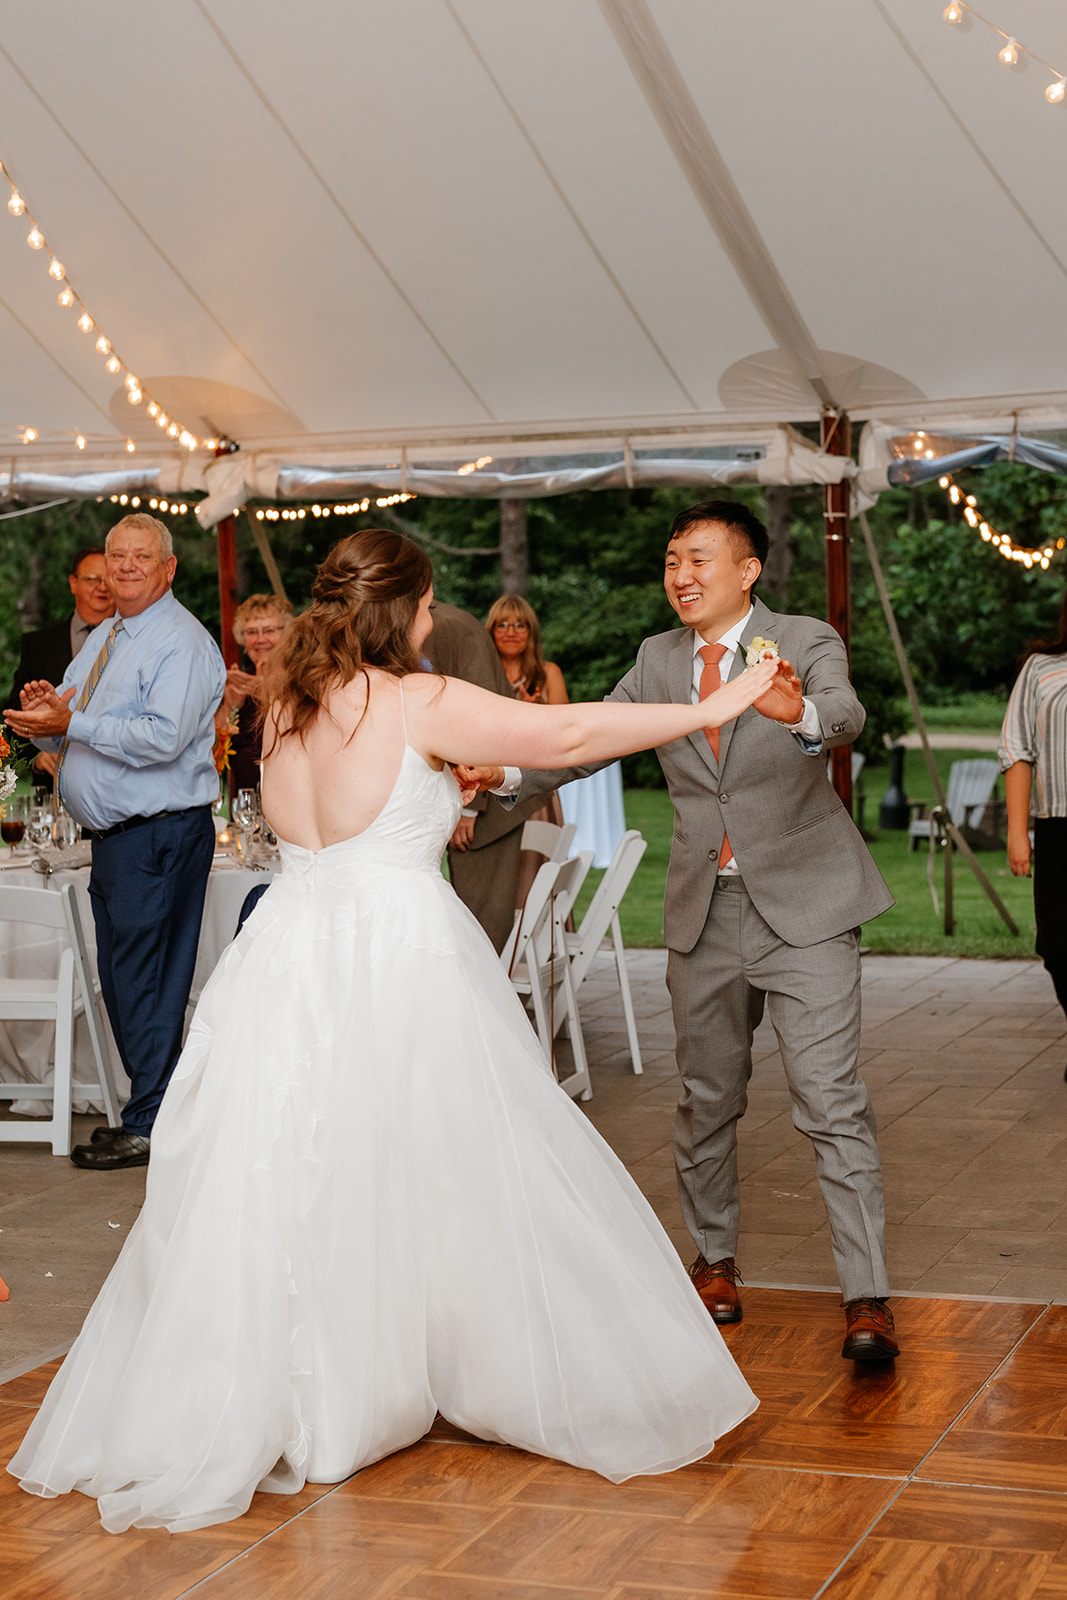 A bride and groom smiling and dancing under a tent with string lights, surrounded by guests.